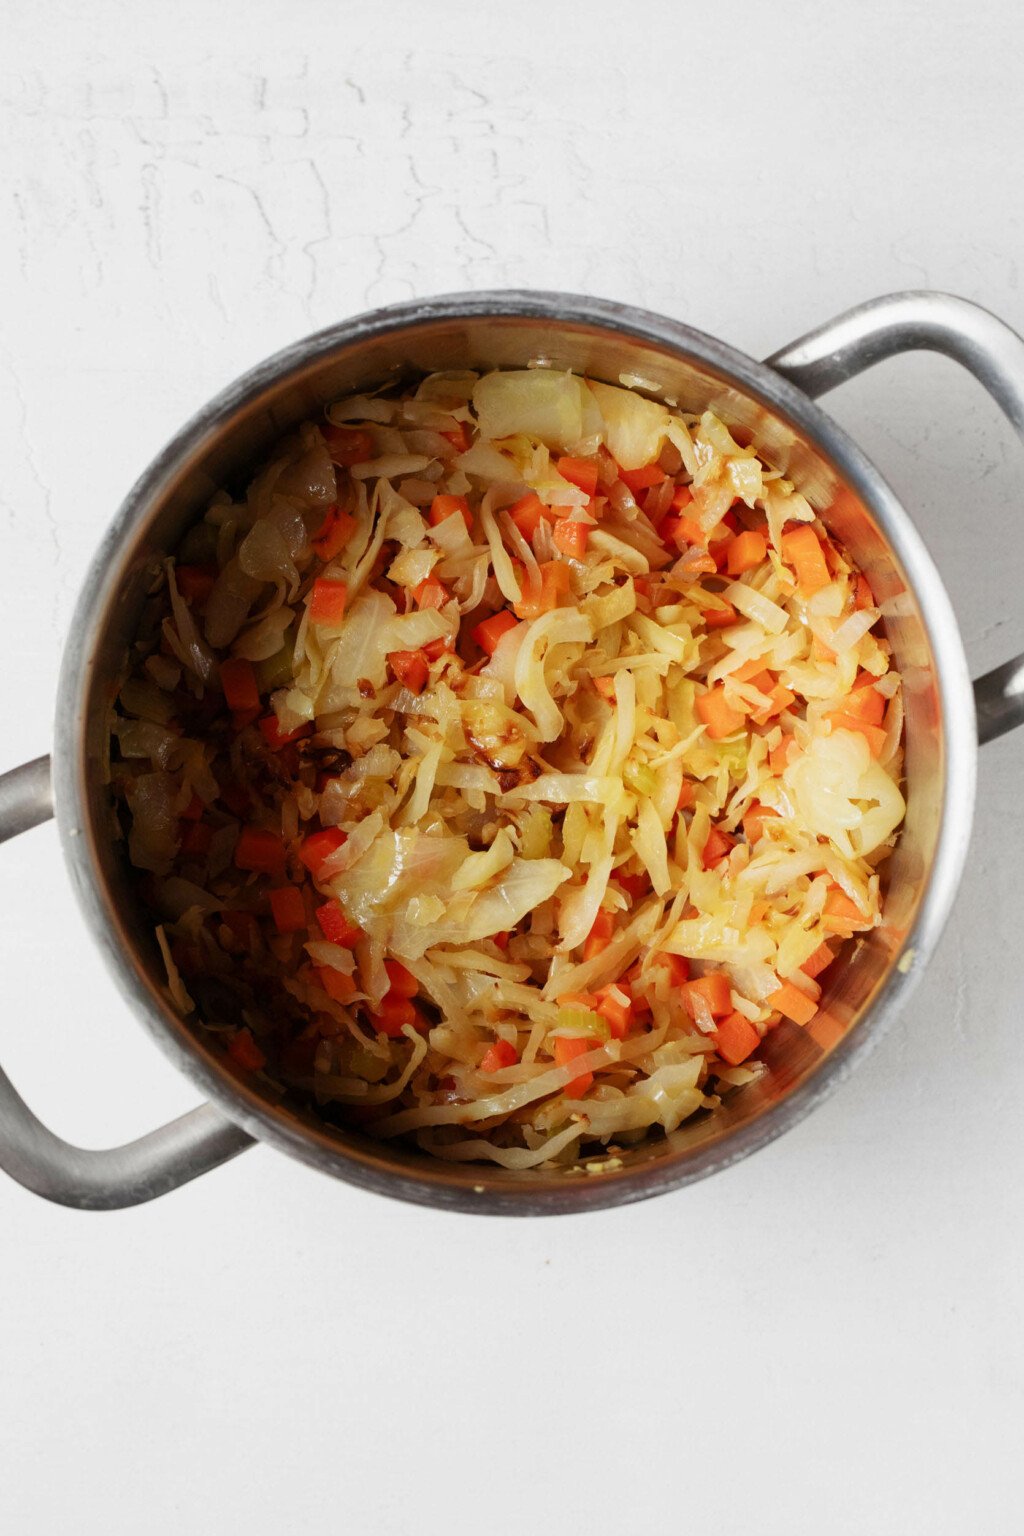 An overhead image of a silver pot with handles, which is being used to sauté cabbage, celery, and carrots. 